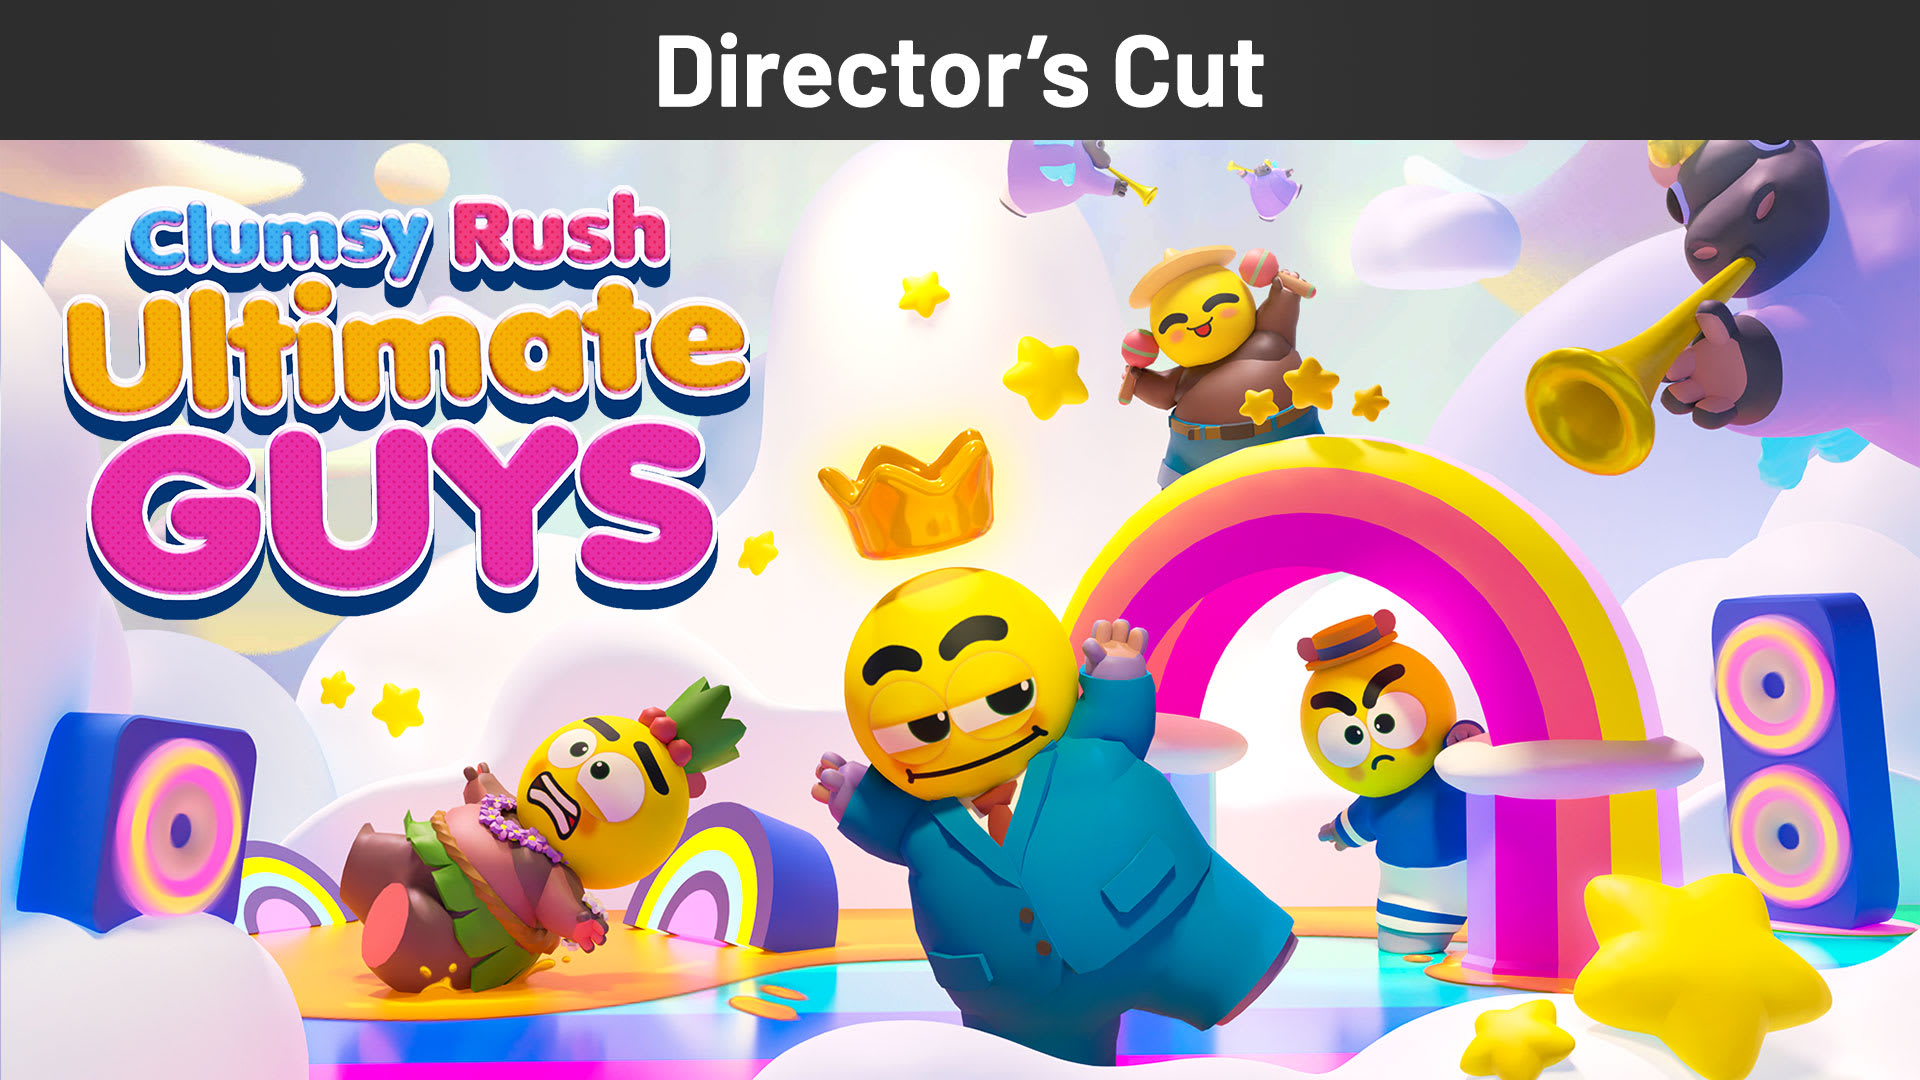 Clumsy Rush: Ultimate Guys Director's Cut